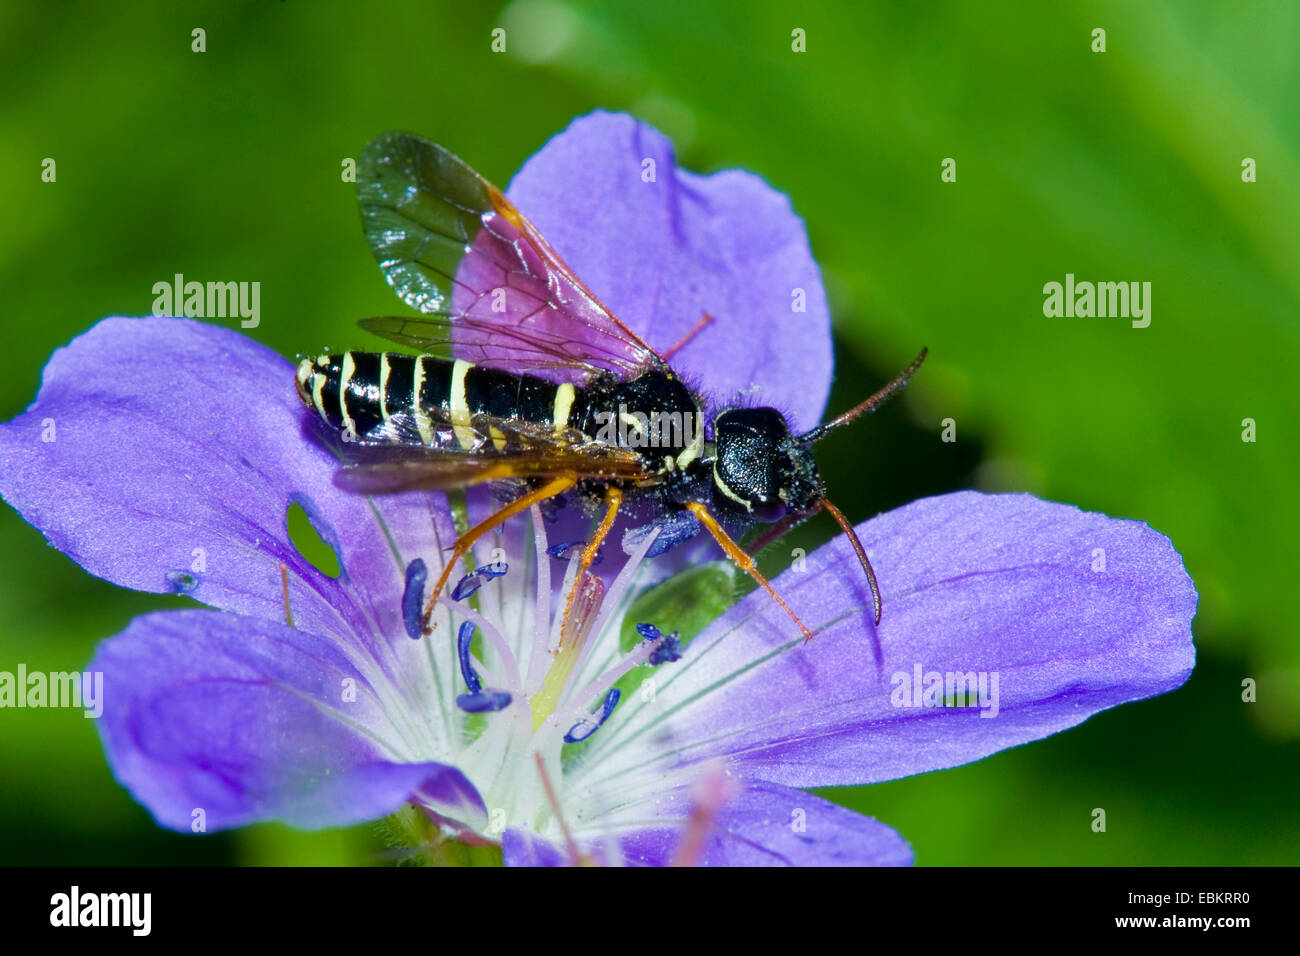 Sawfly (Megalodontes spec.), sitting on a violet flower, Germany Stock Photo